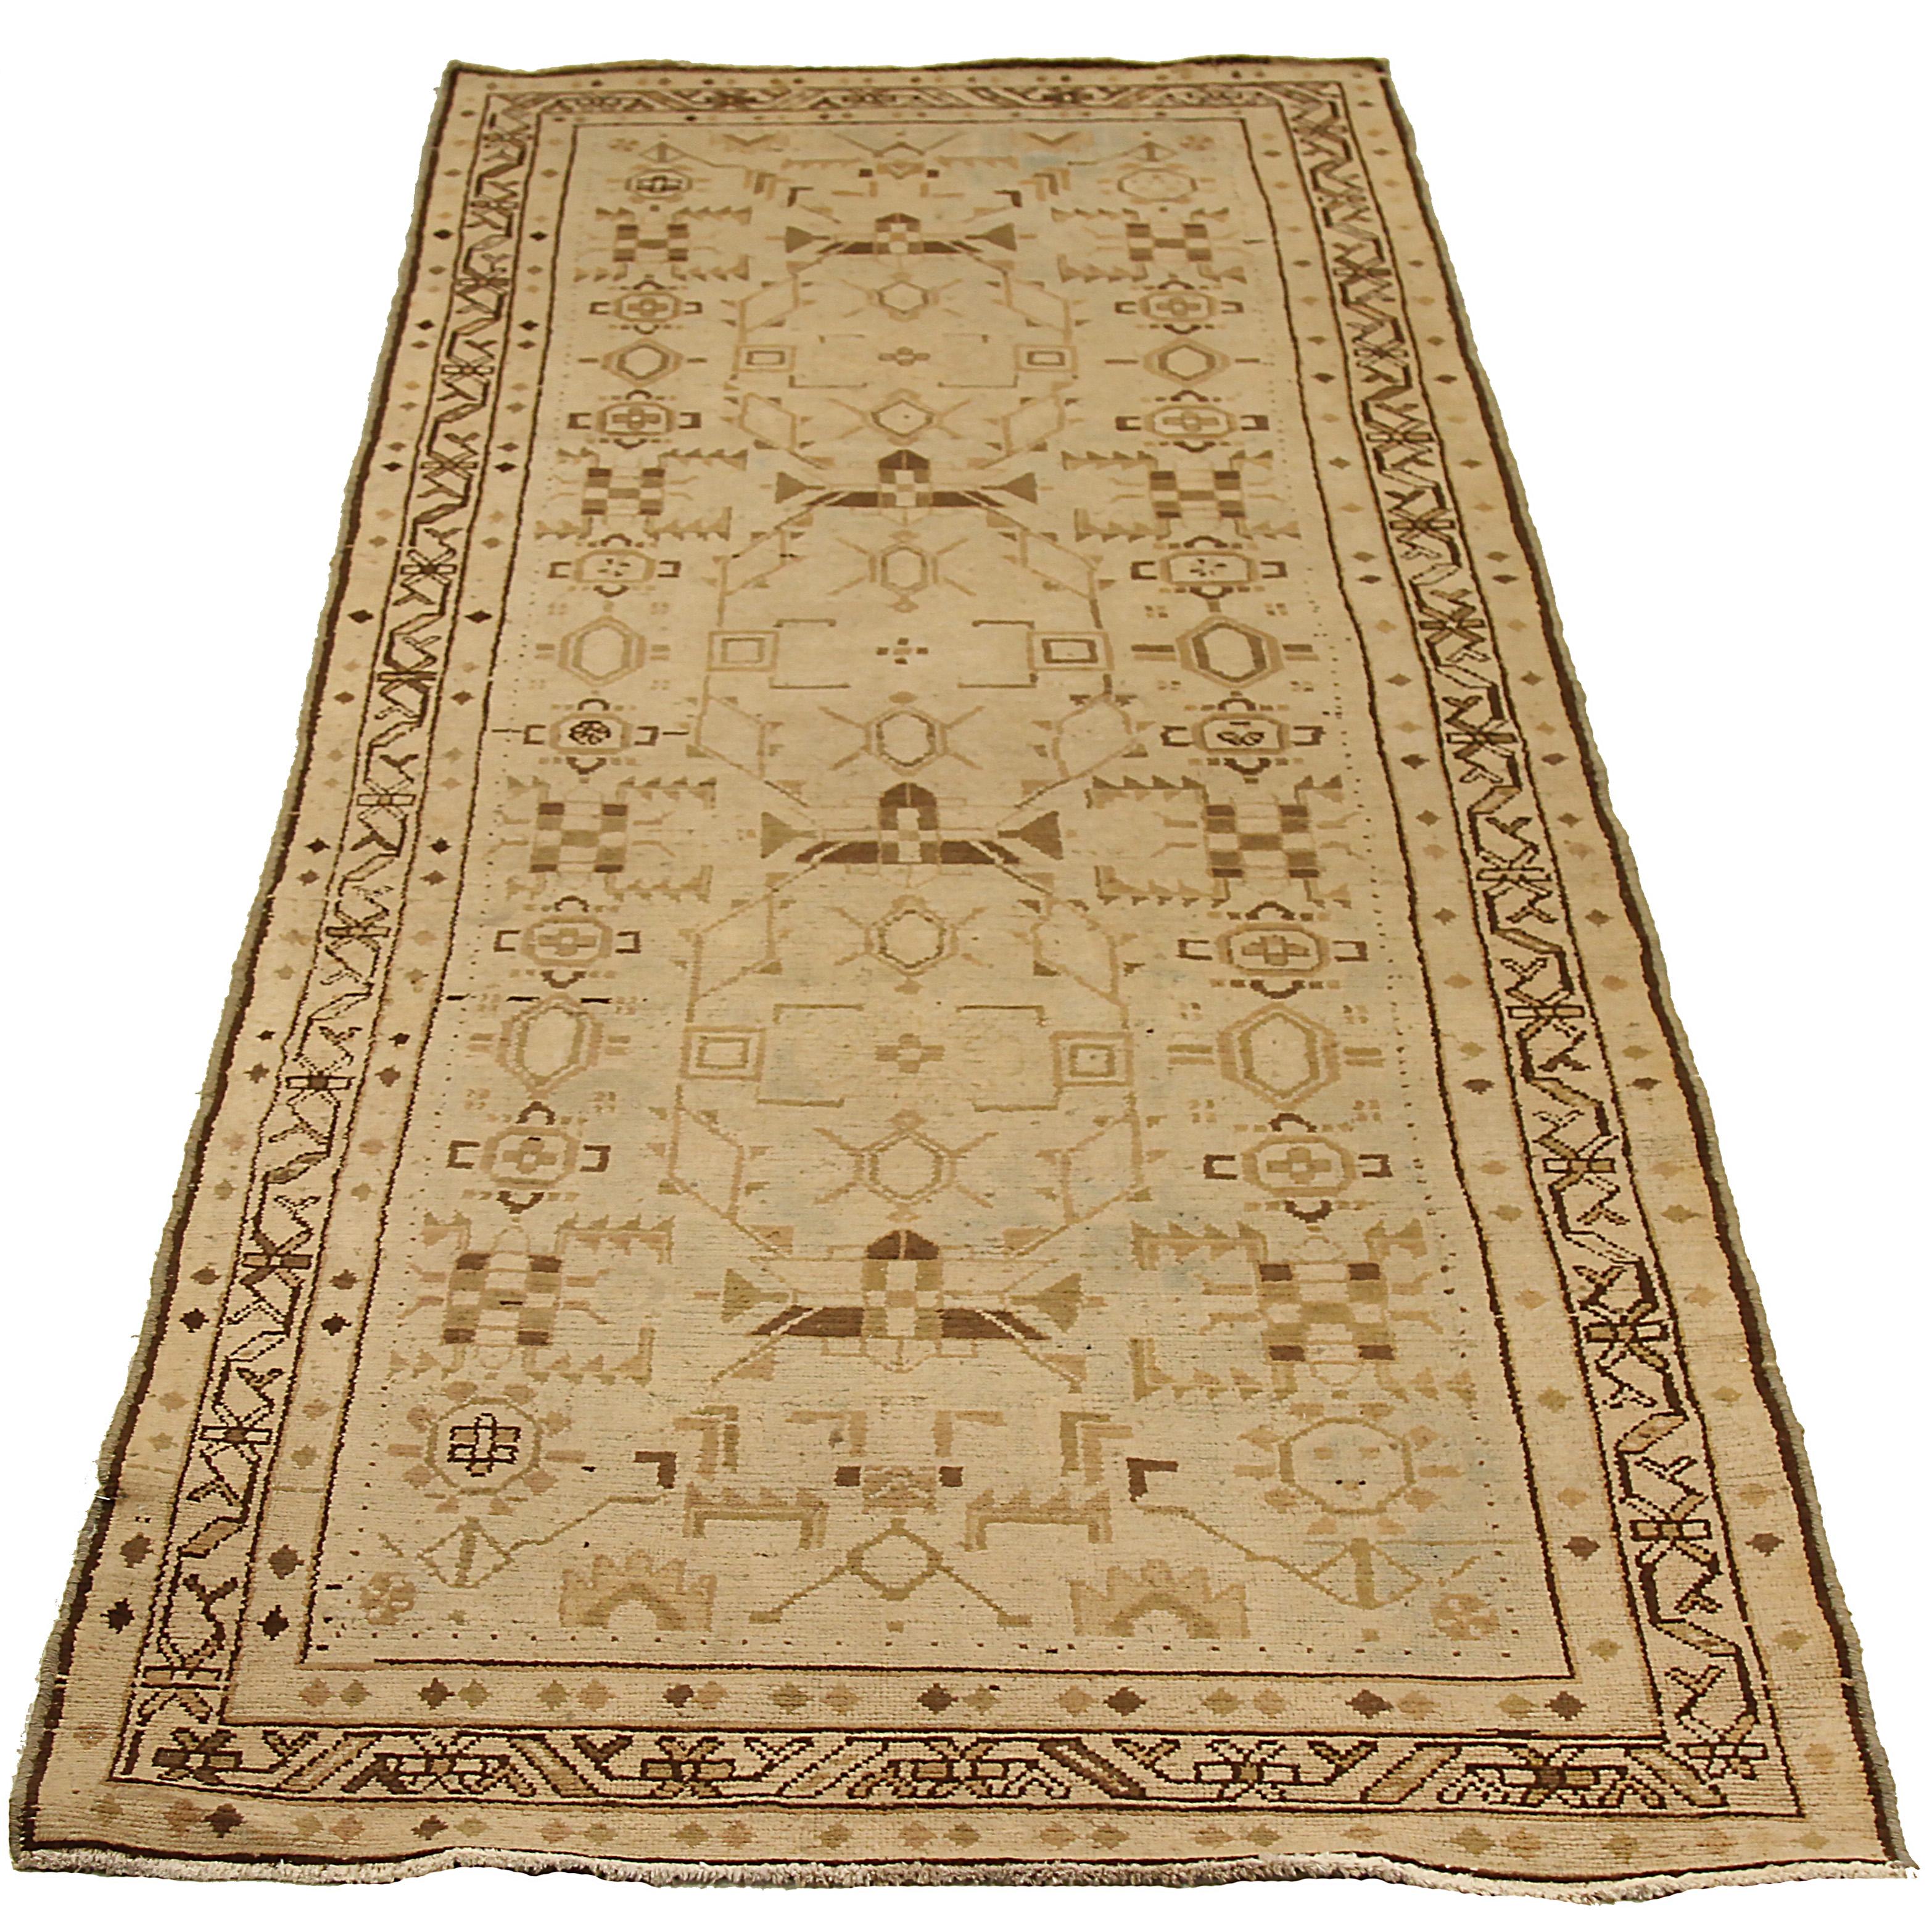 Antique Persian runner rug handwoven from the finest sheep’s wool and colored with all-natural vegetable dyes that are safe for humans and pets. It’s a traditional Shahsavan design highlighted by geometric medallions on the centerfield. It’s a